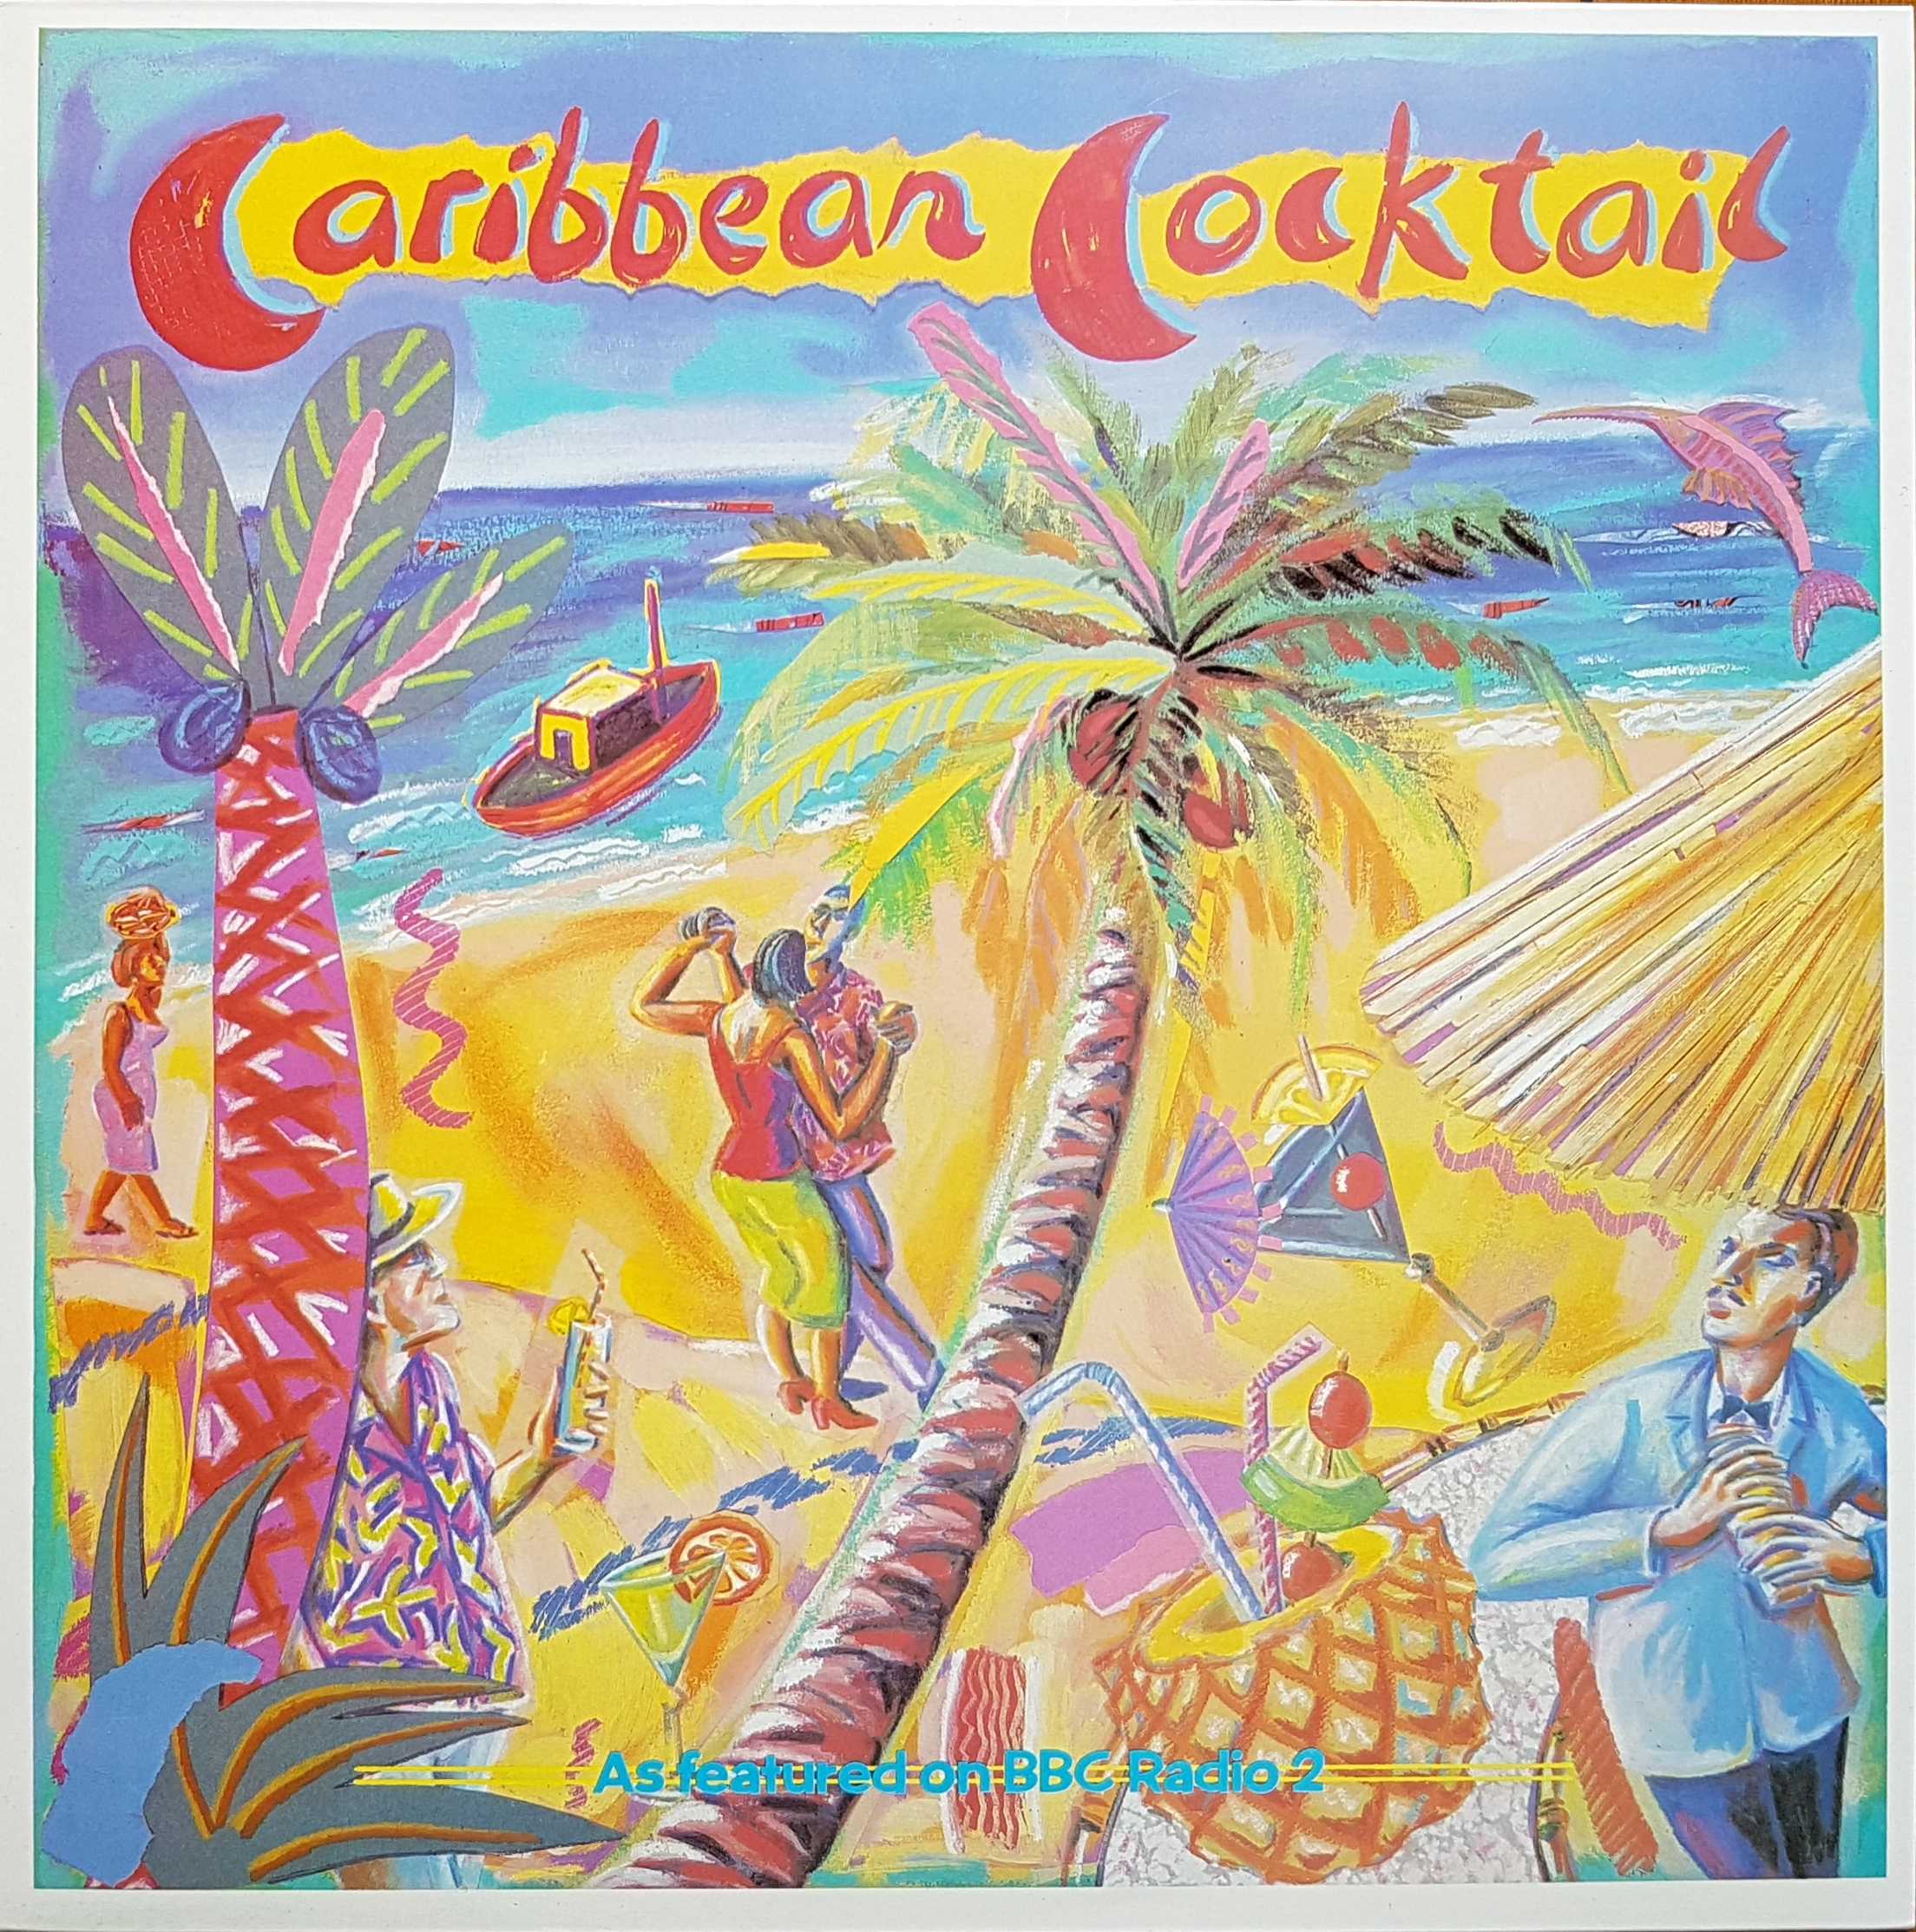 Picture of REC 559 Caribbean cocktail by artist Various from the BBC albums - Records and Tapes library